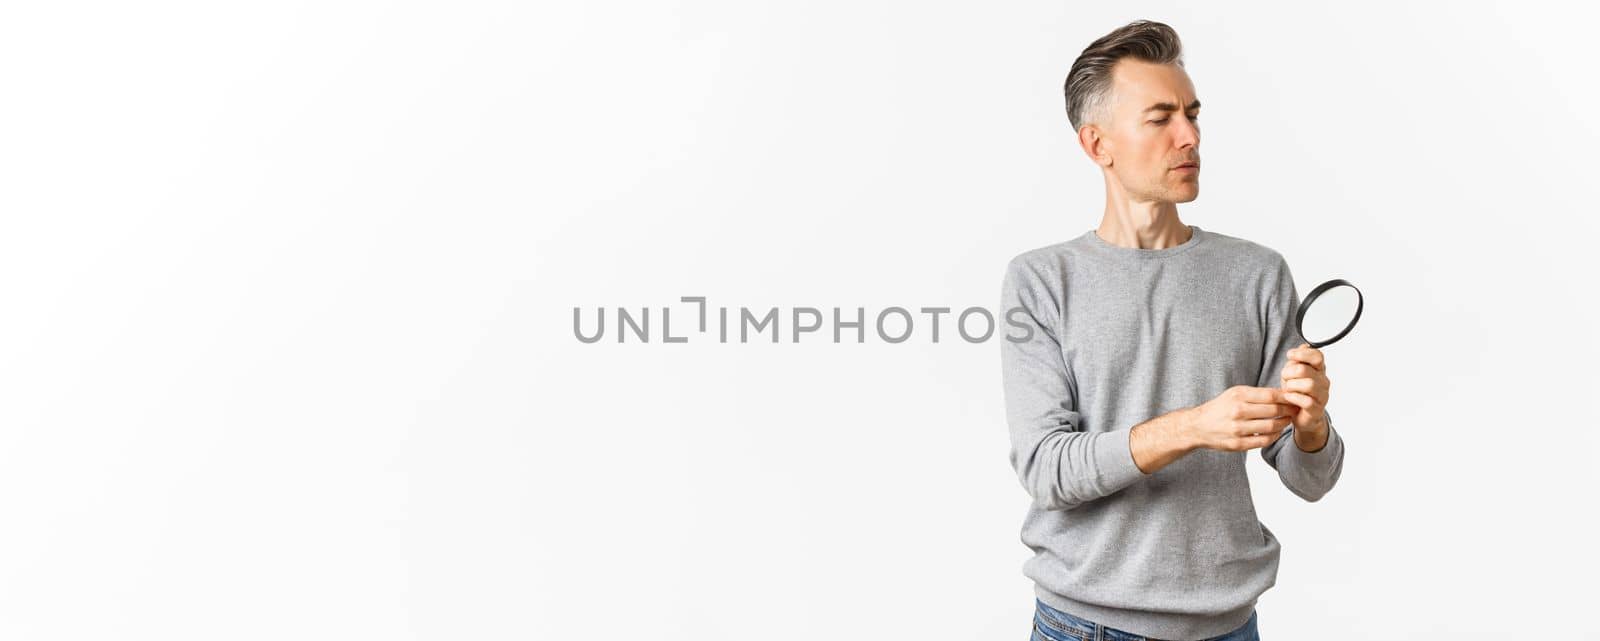 Portrait of thoughtful middle-aged man looking through magnifying glass, searching for something or reading, standing over white background.